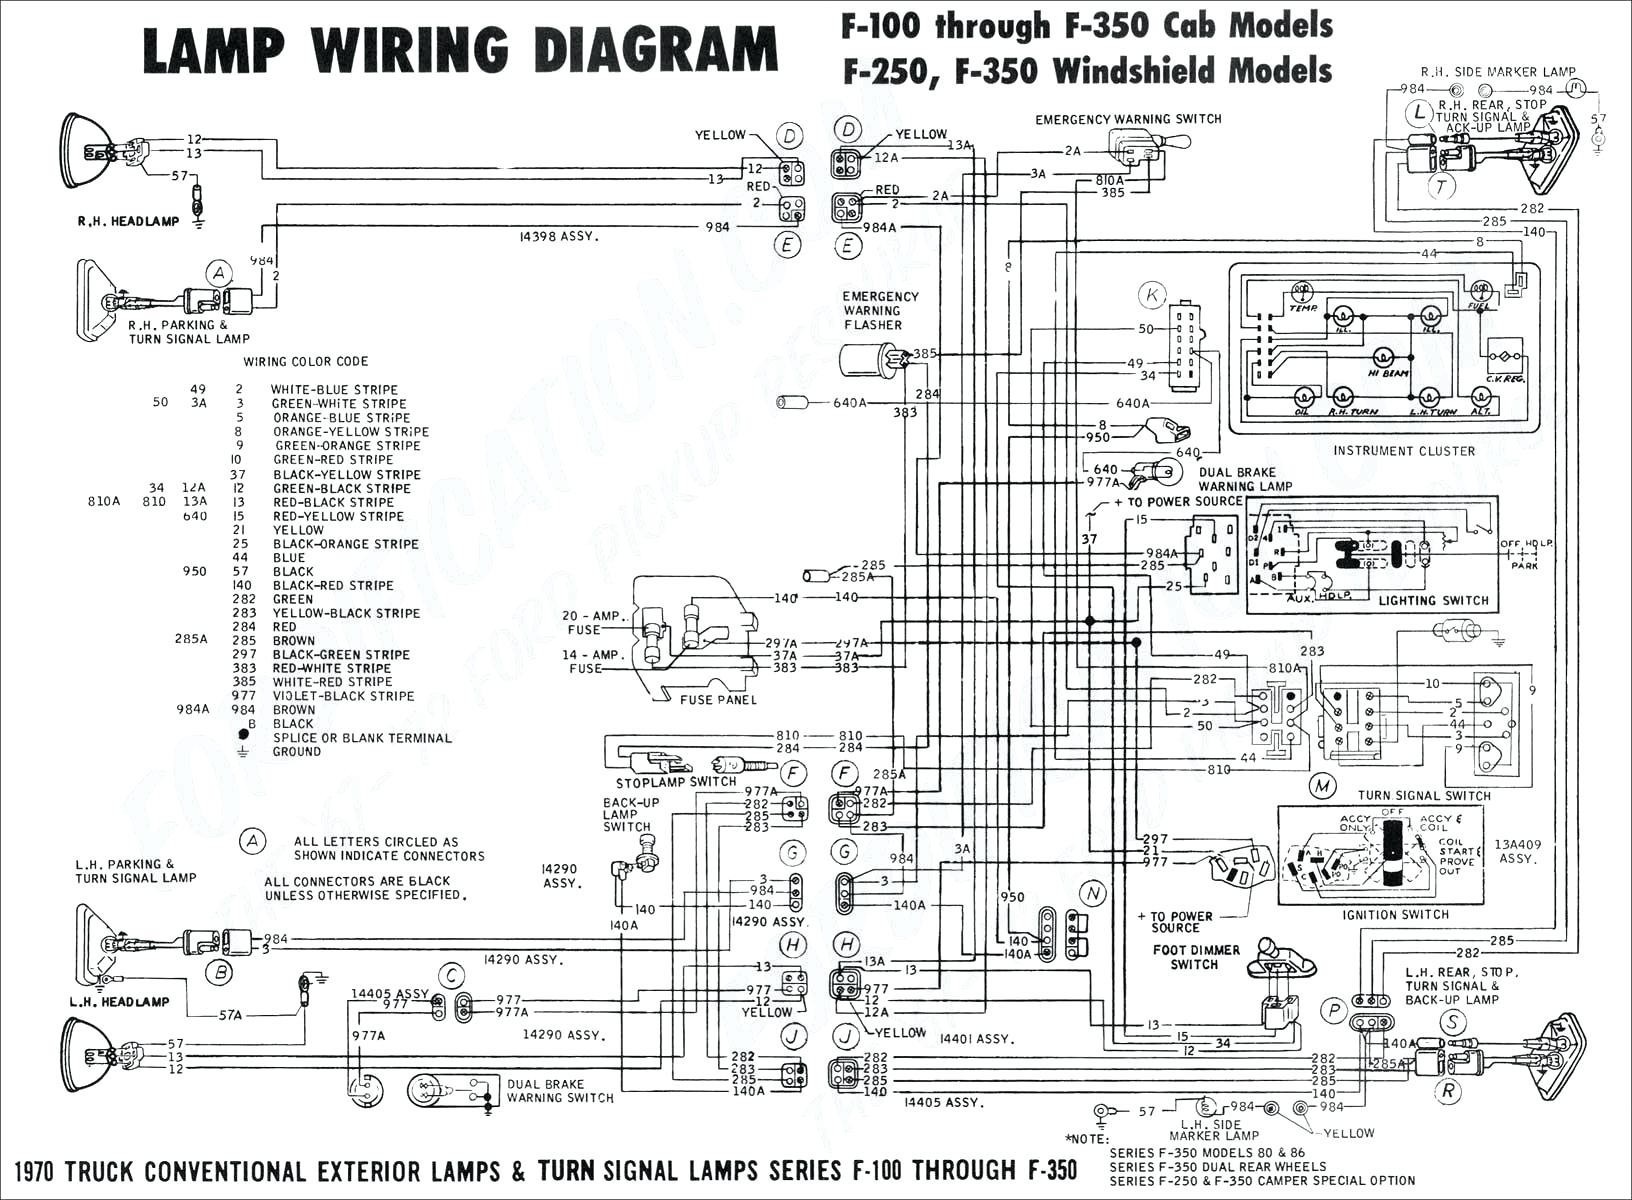 Wiring Diagram for Auto Dimming Mirror Refrence Stop Turn Tail Light Wiring Diagram Beautiful 1979 ford